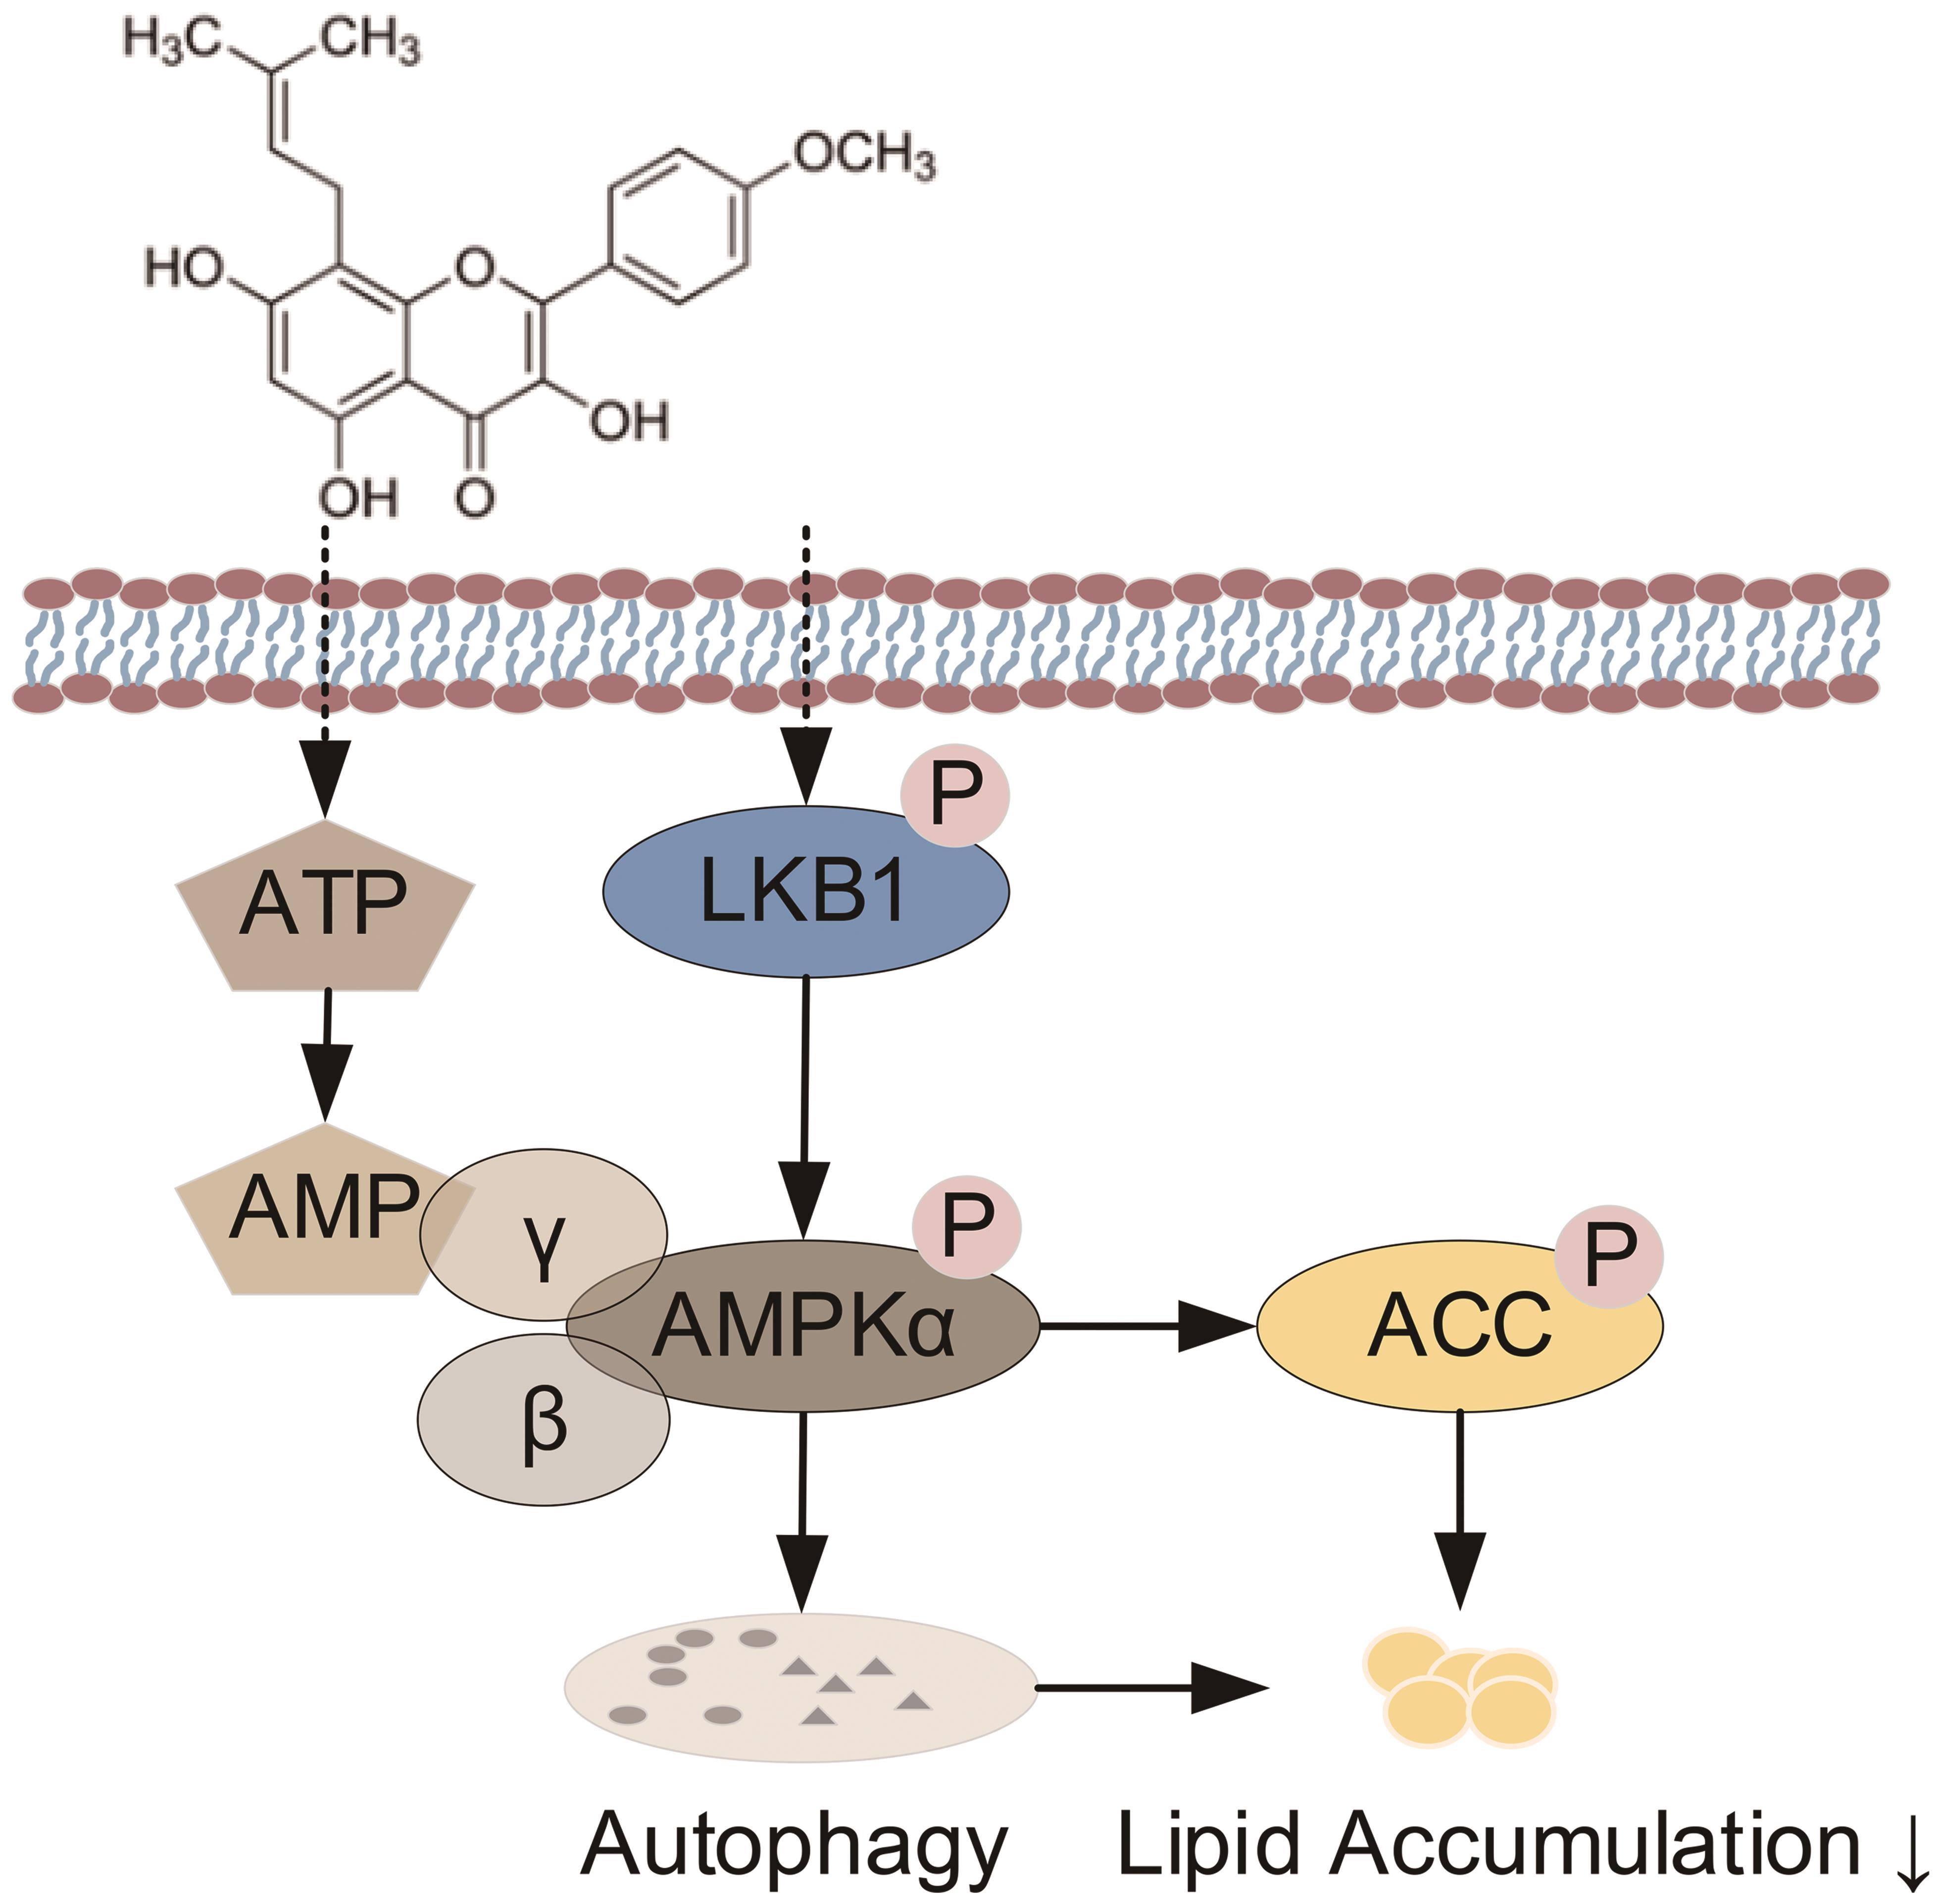 Proposed mechanisms of icaritin on lipid accumulation.